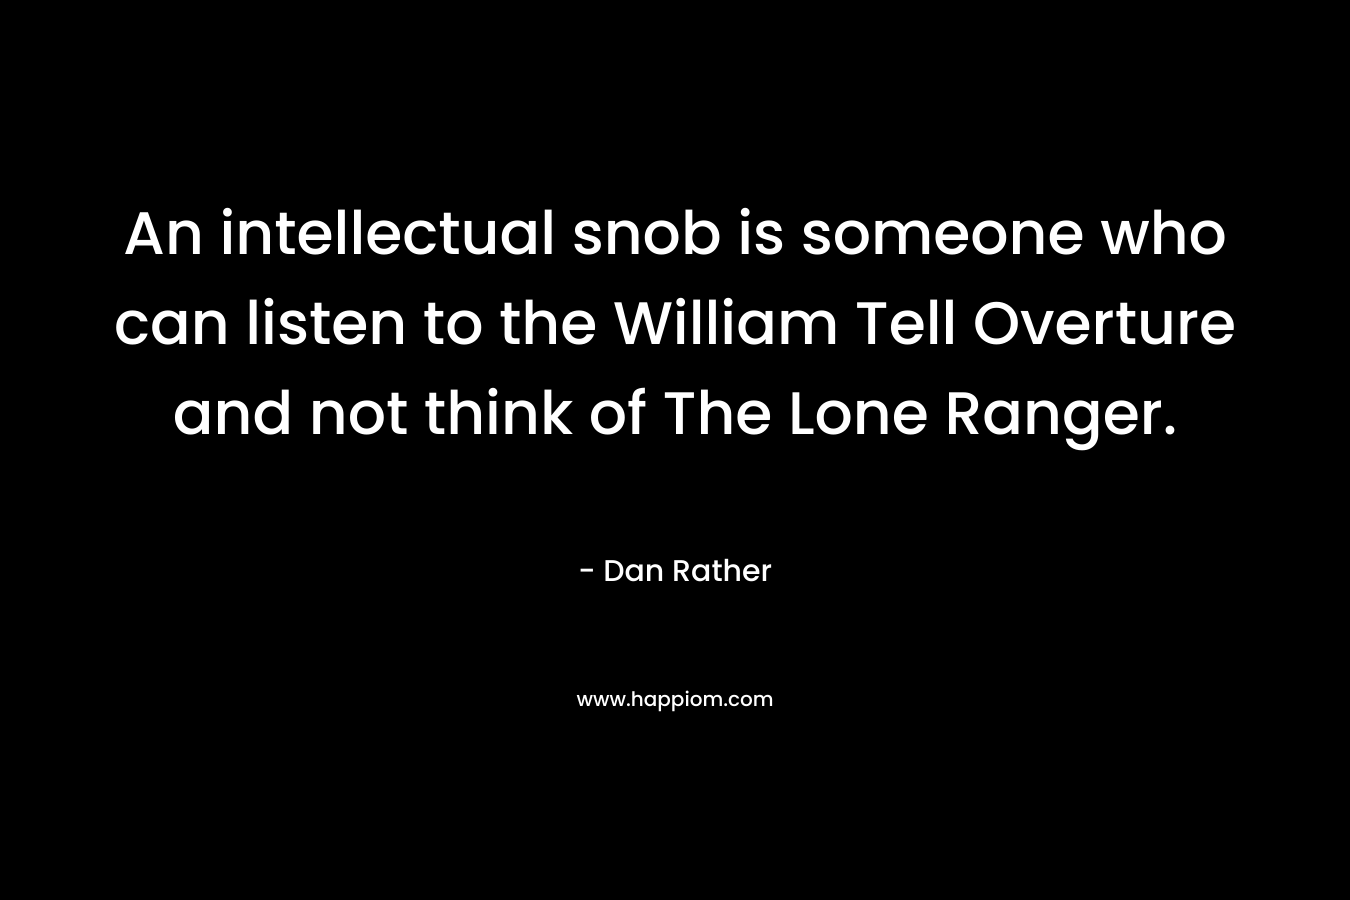 An intellectual snob is someone who can listen to the William Tell Overture and not think of The Lone Ranger. 